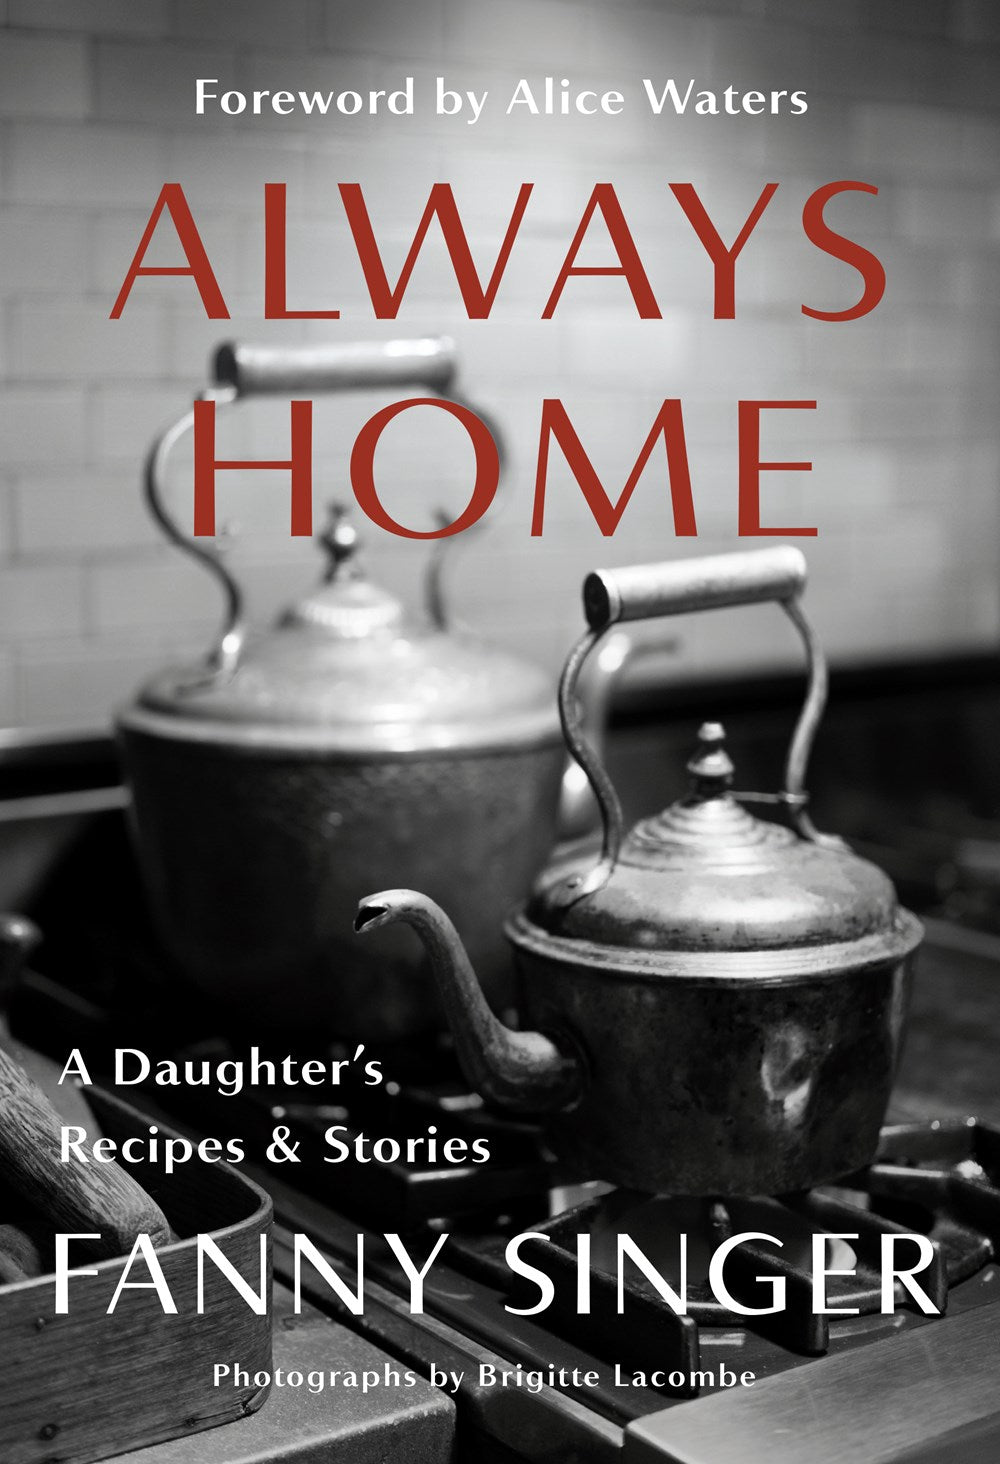 Always Home: A Daughter's Recipes & Stories - Fanny Singer